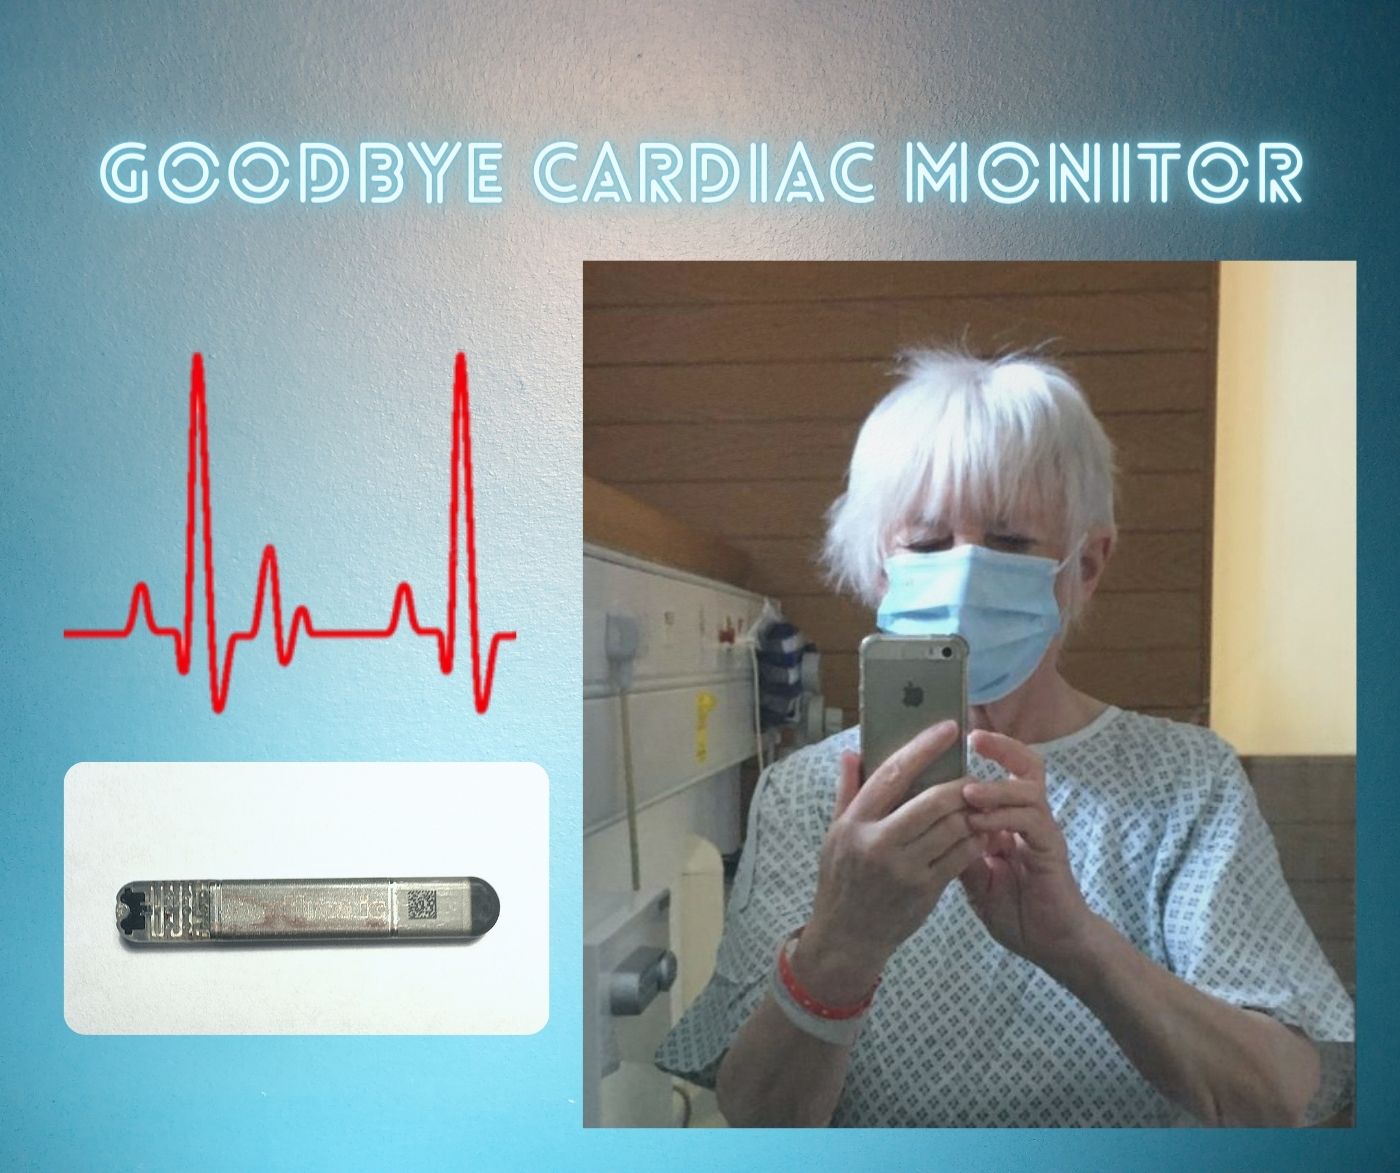 Personal journey heart monitor removed